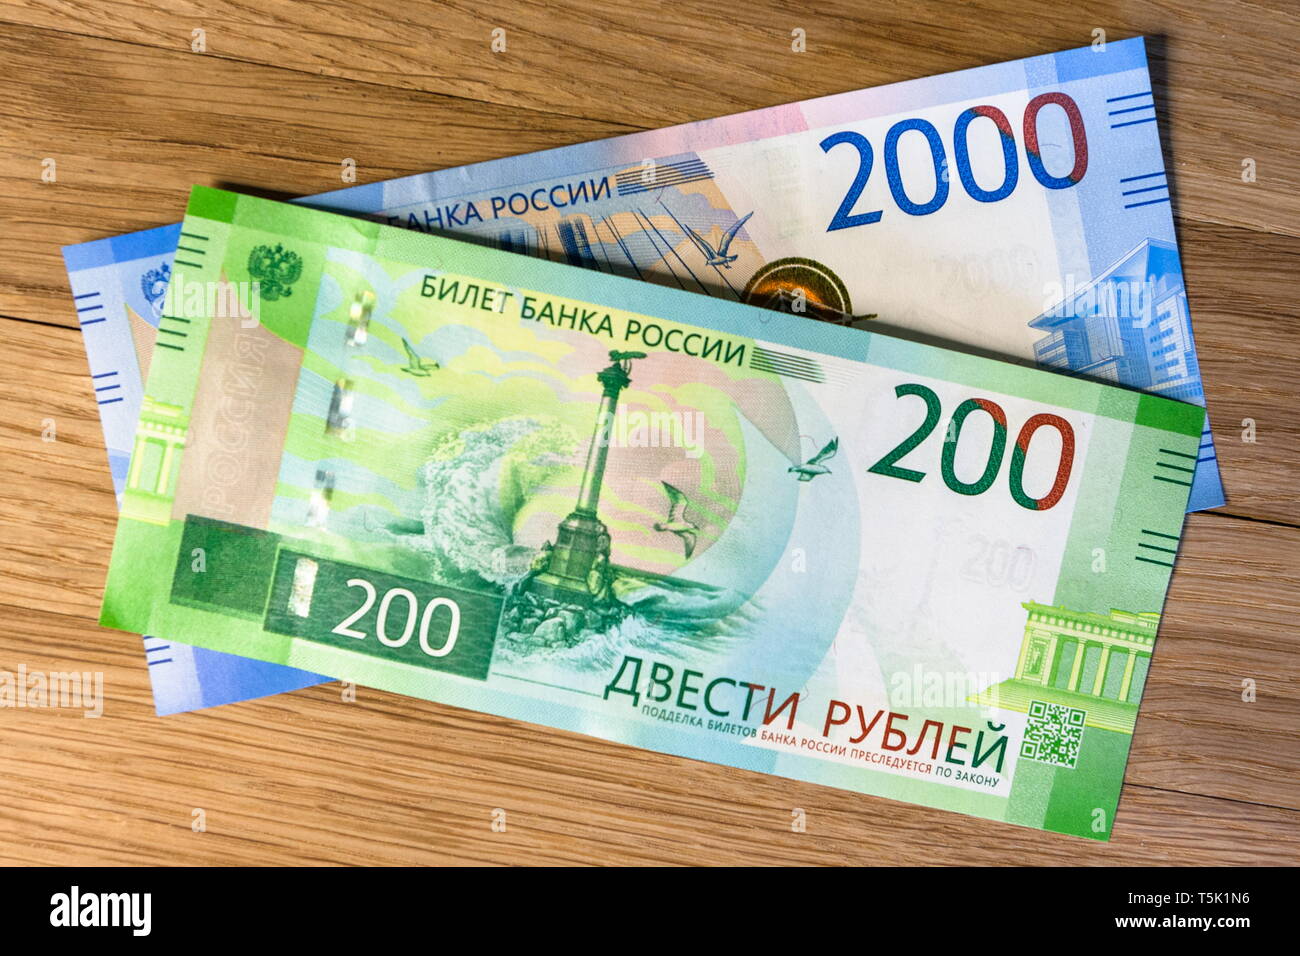 Money on a woody background. Rubles Stock Photo